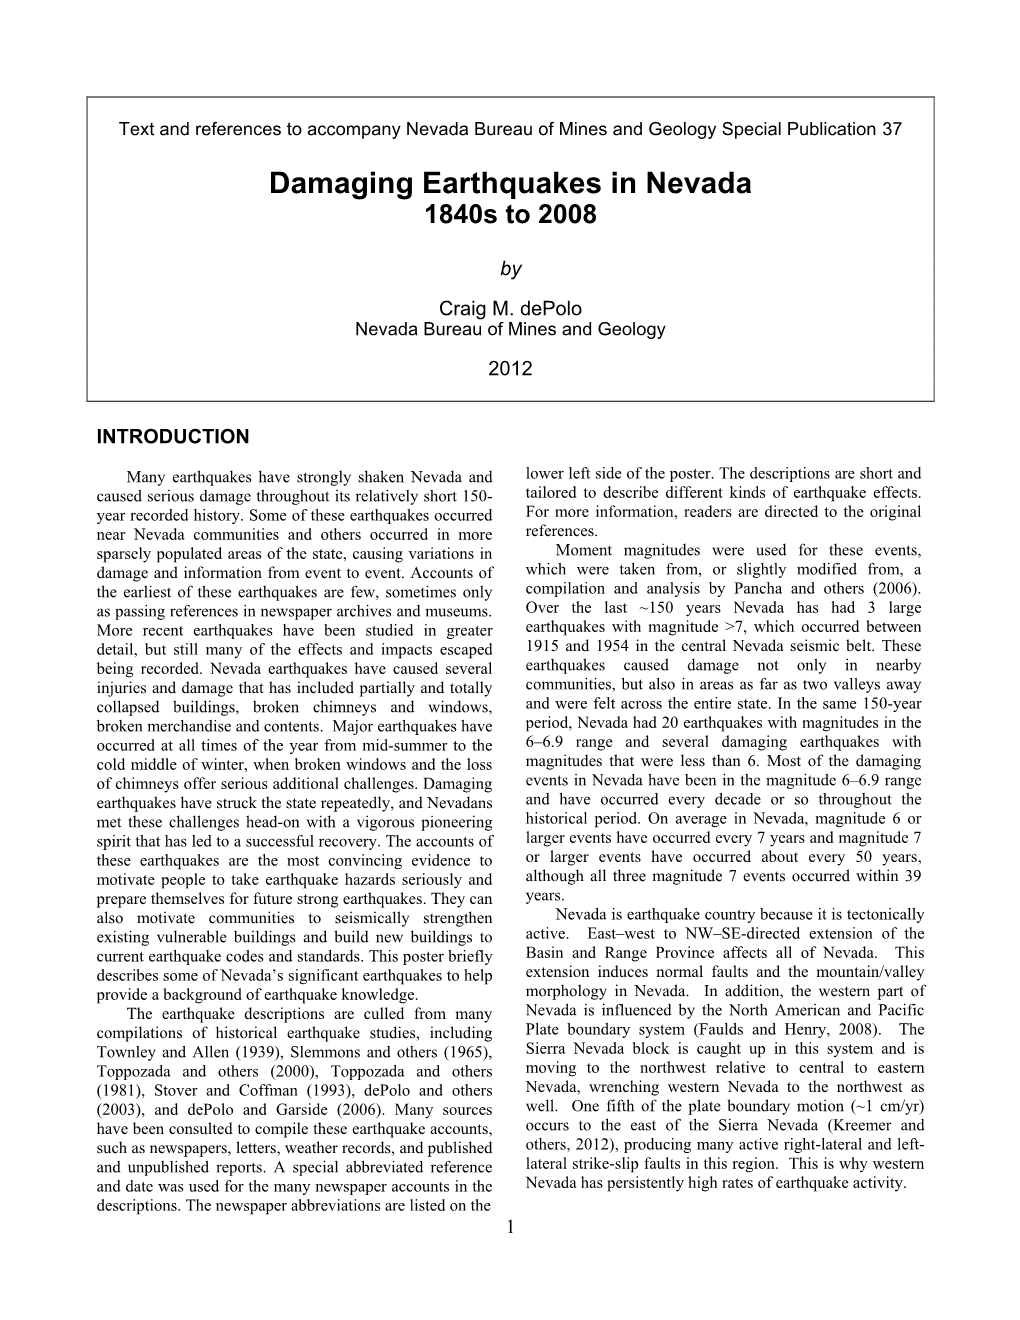 Damaging Earthquakes in Nevada 1840S to 2008